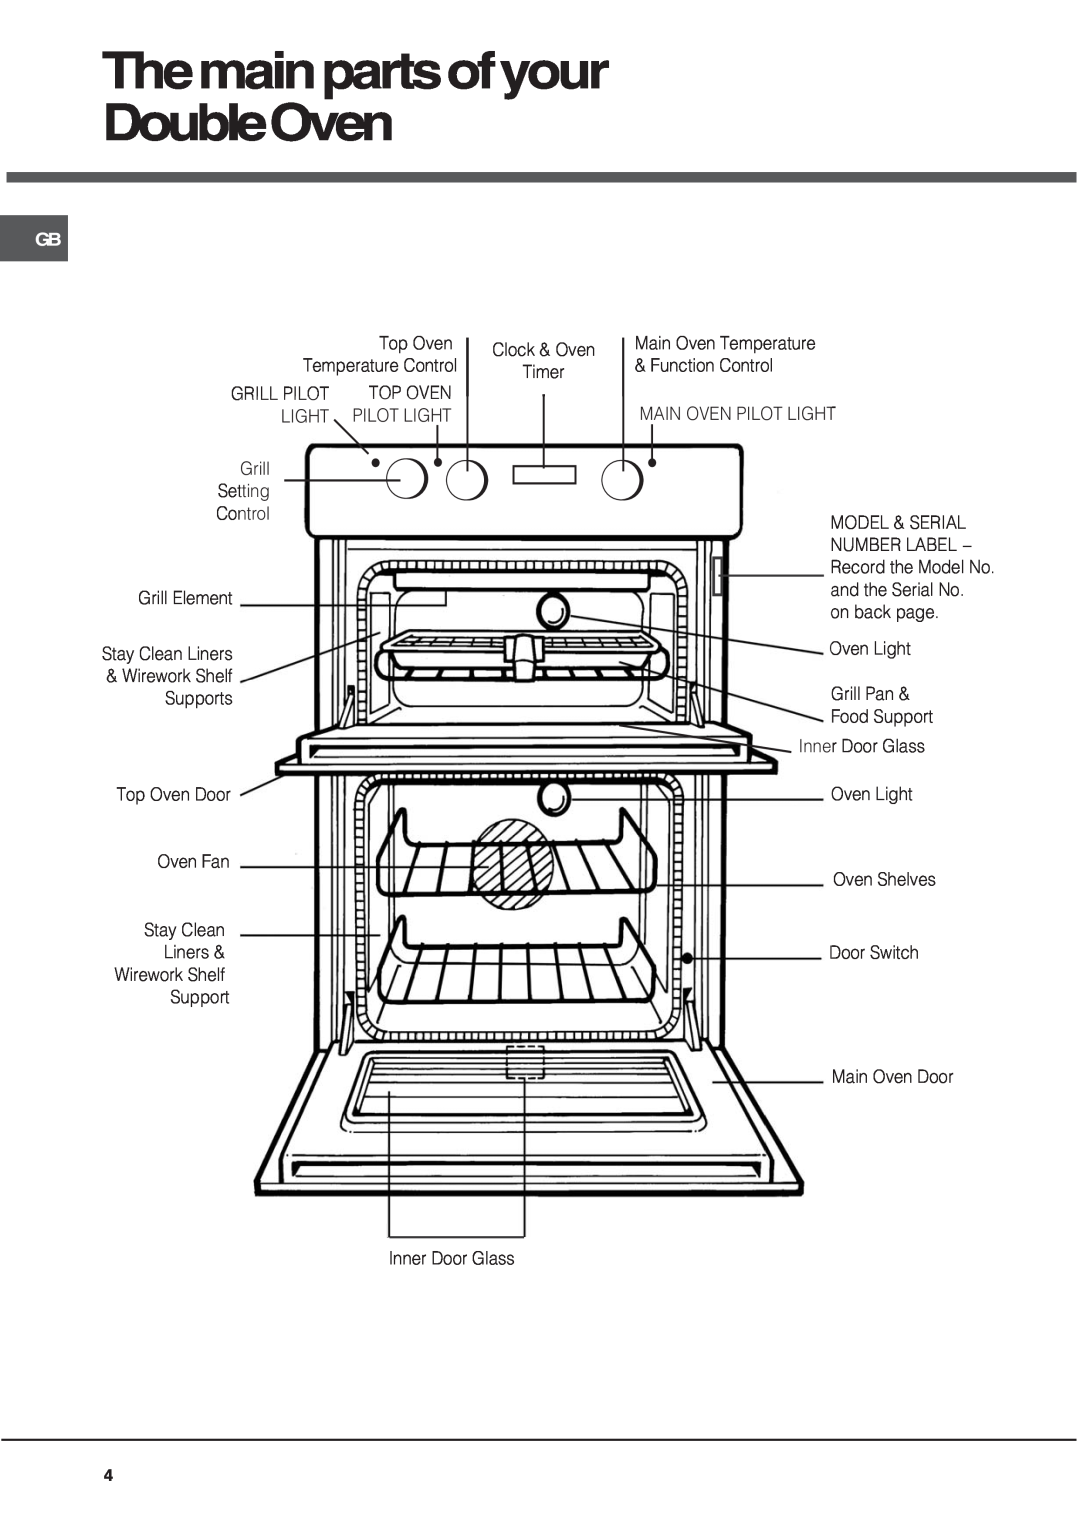 Hotpoint UY46X/2 UH53 manual Themainpartsofyour DoubleOven 